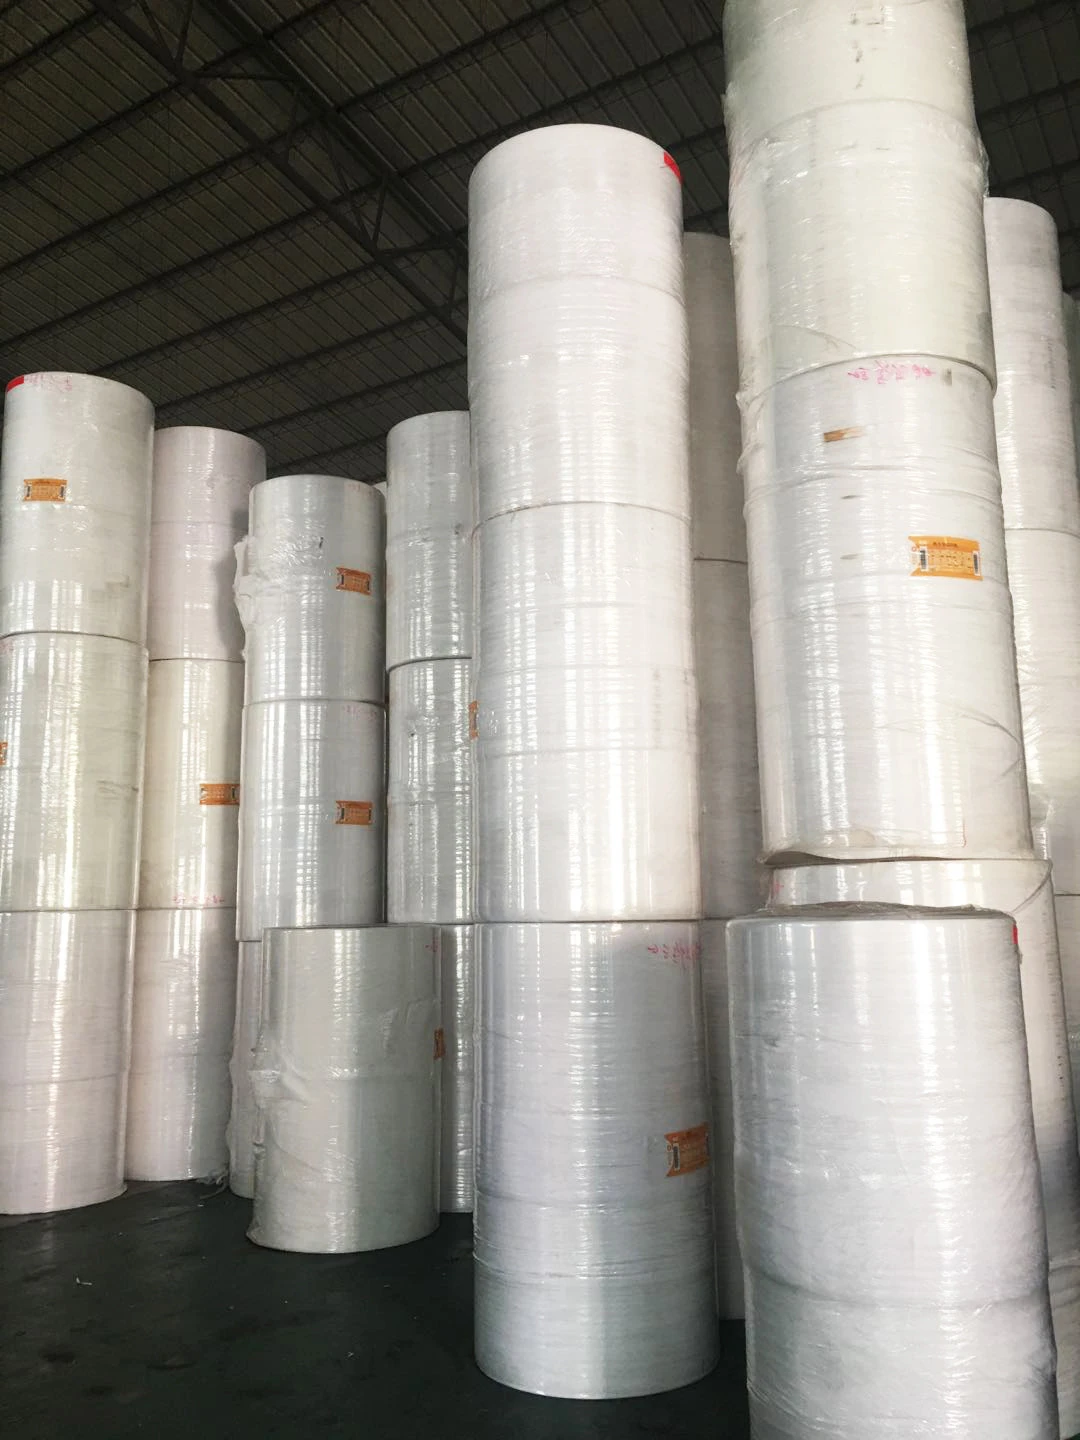 Transfer Rate 95% Dye Sublimation rolls heat transfer paper for t-shirt textile fabric printing